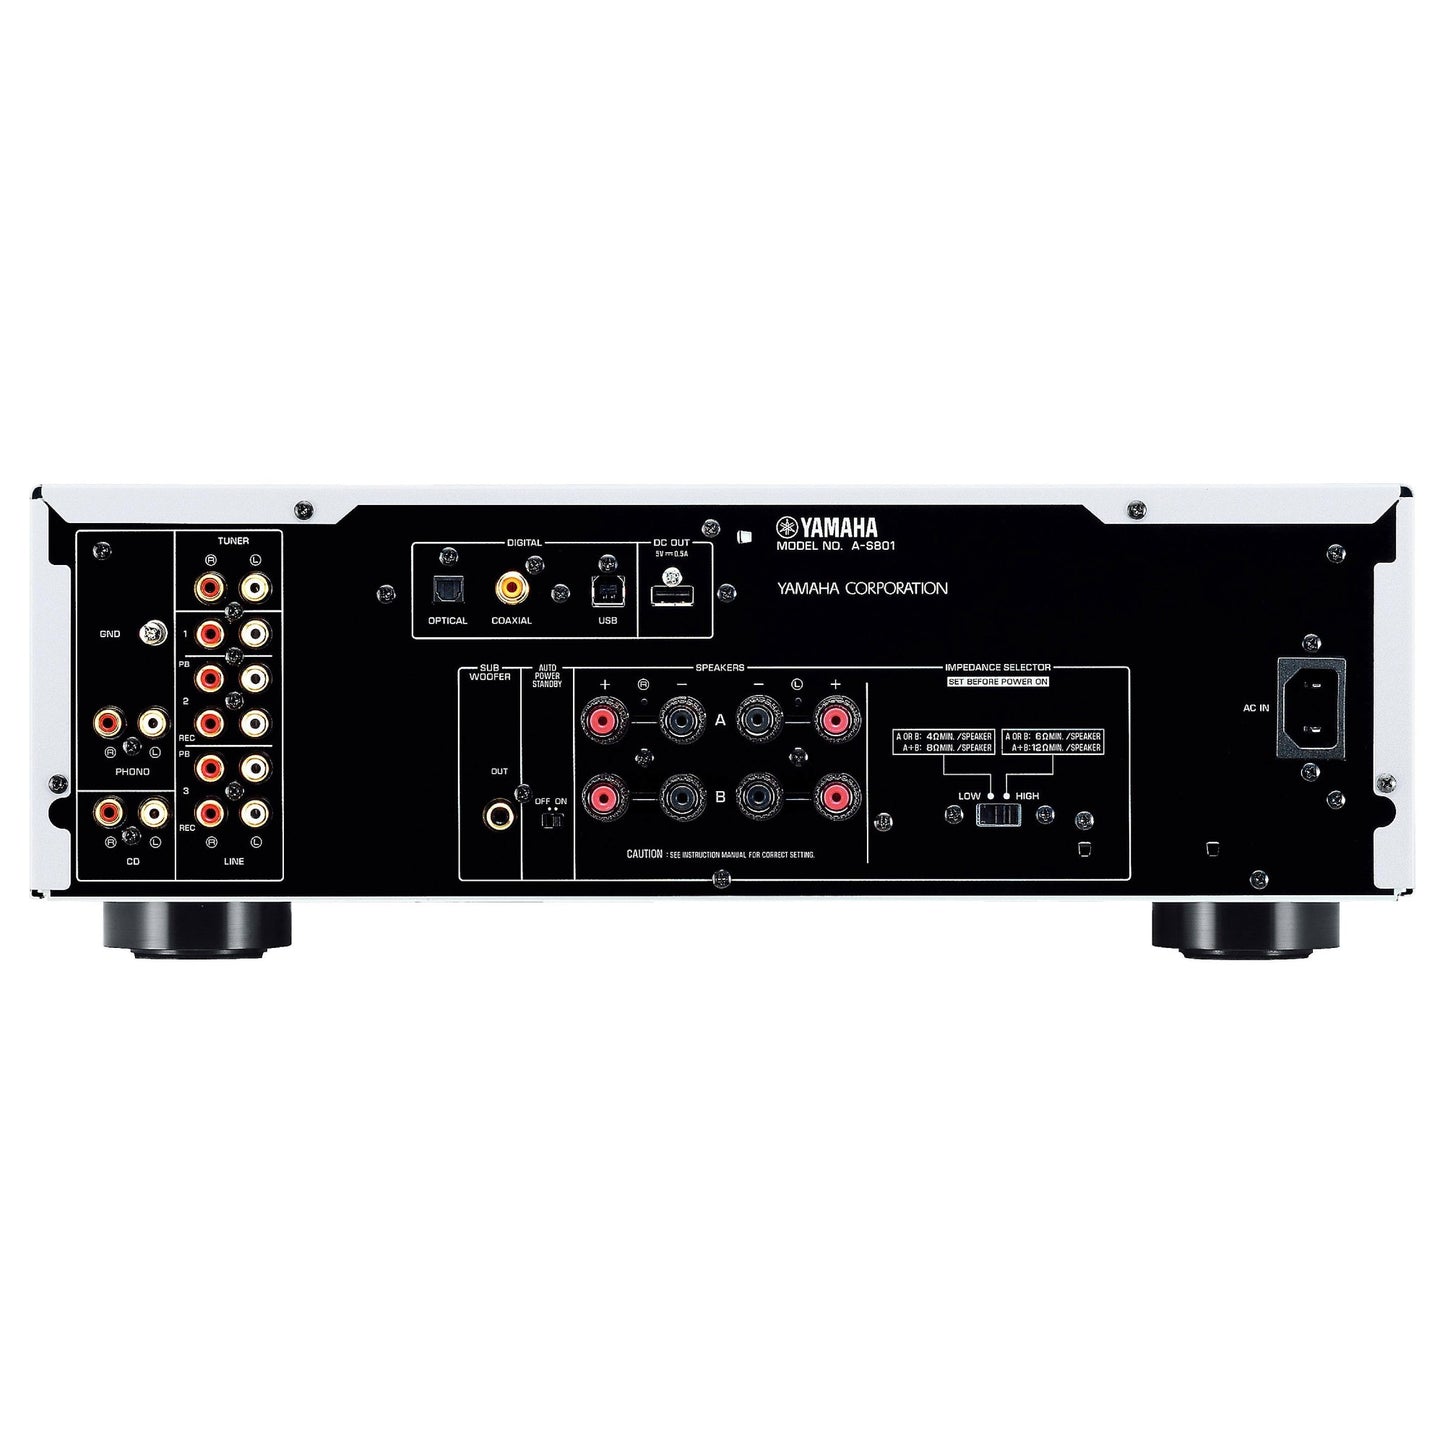 A-S801 Integrated Amplifier